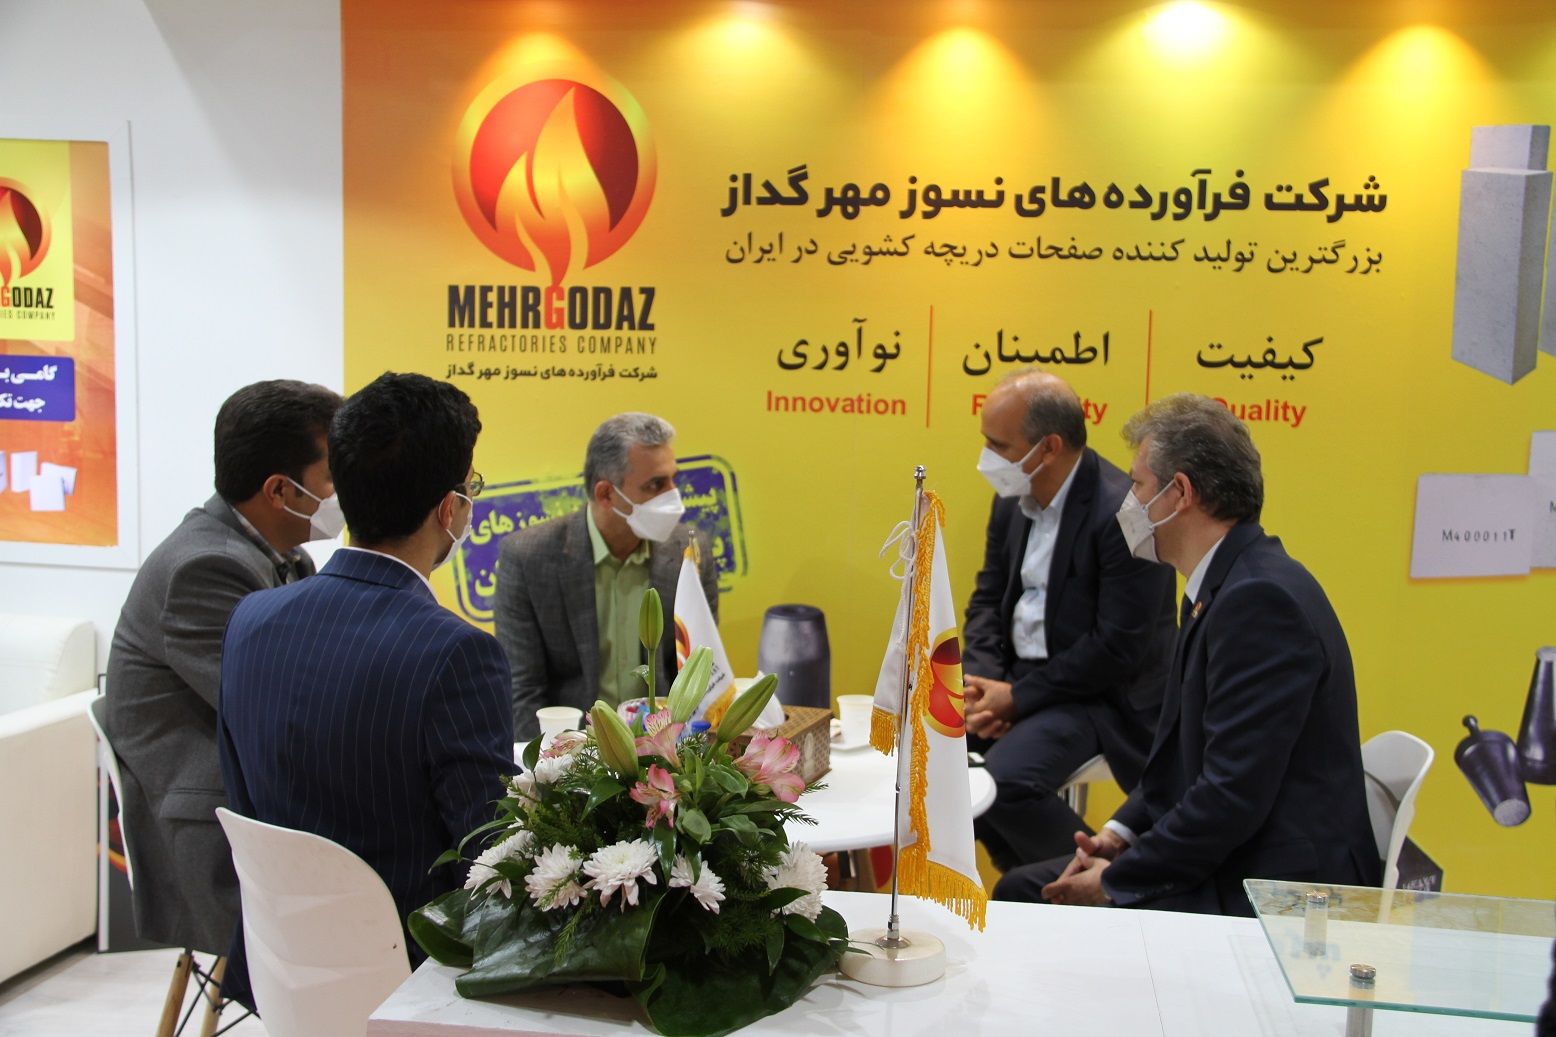 IMG 1333 - The participation of Mehrgodaz refractories company in the sixth refractory exhibition